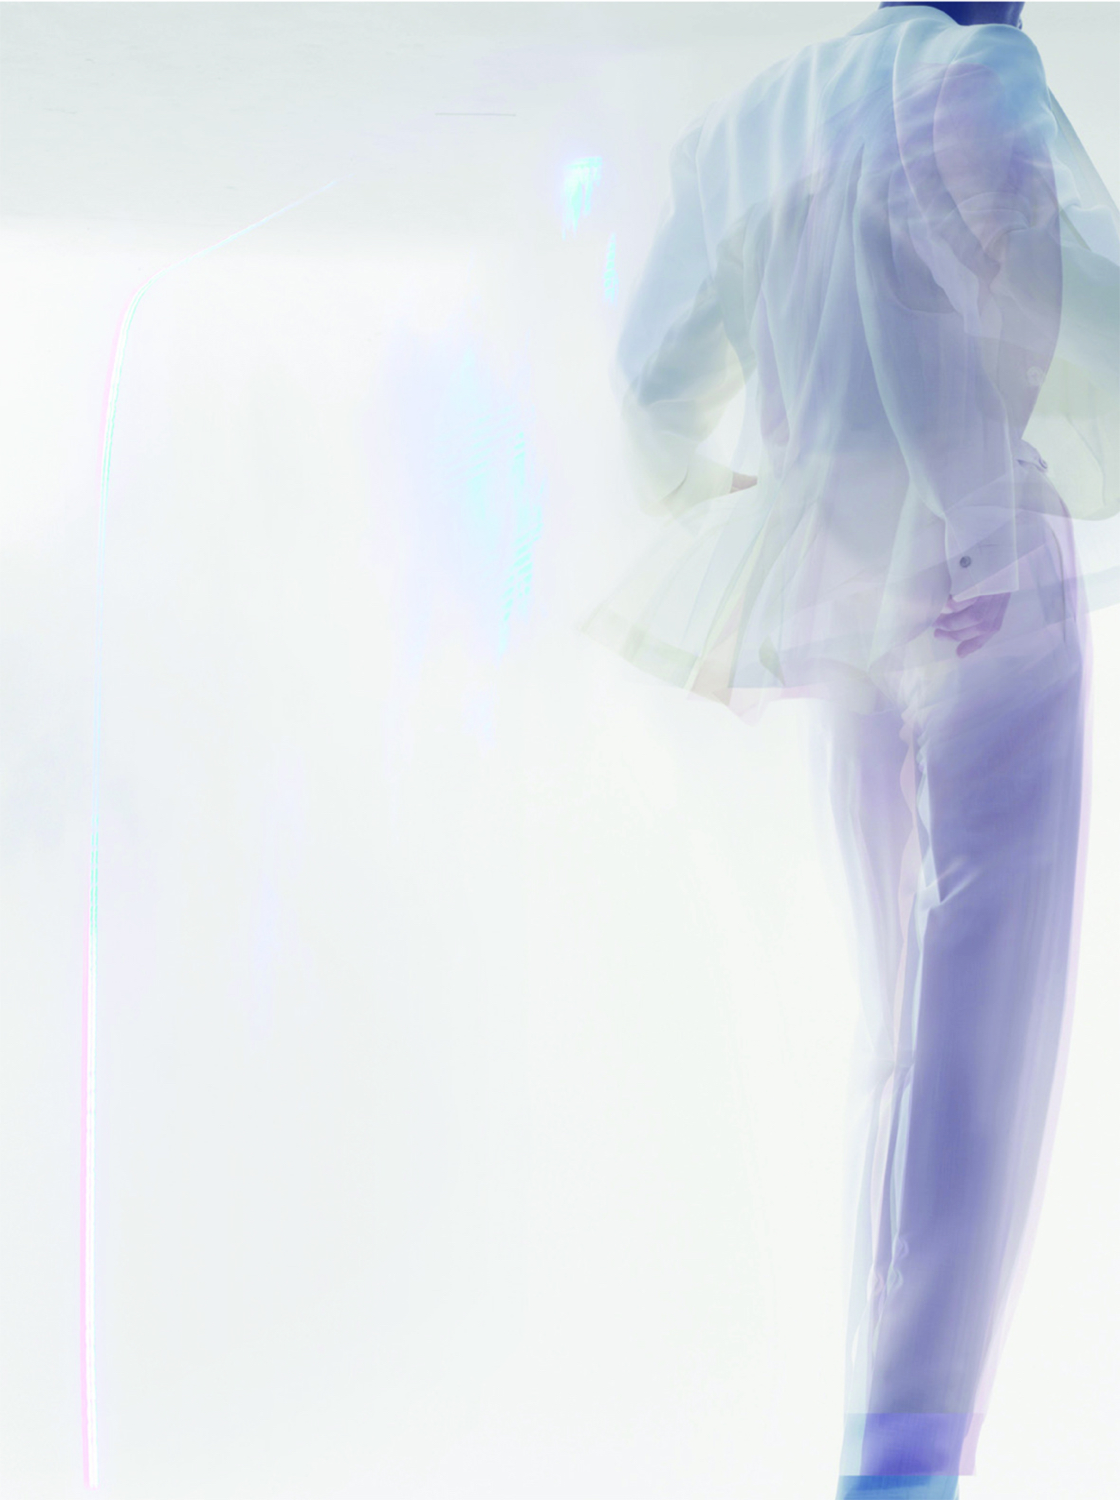  Unstructured image 2007. Photograph Nick Knight. 